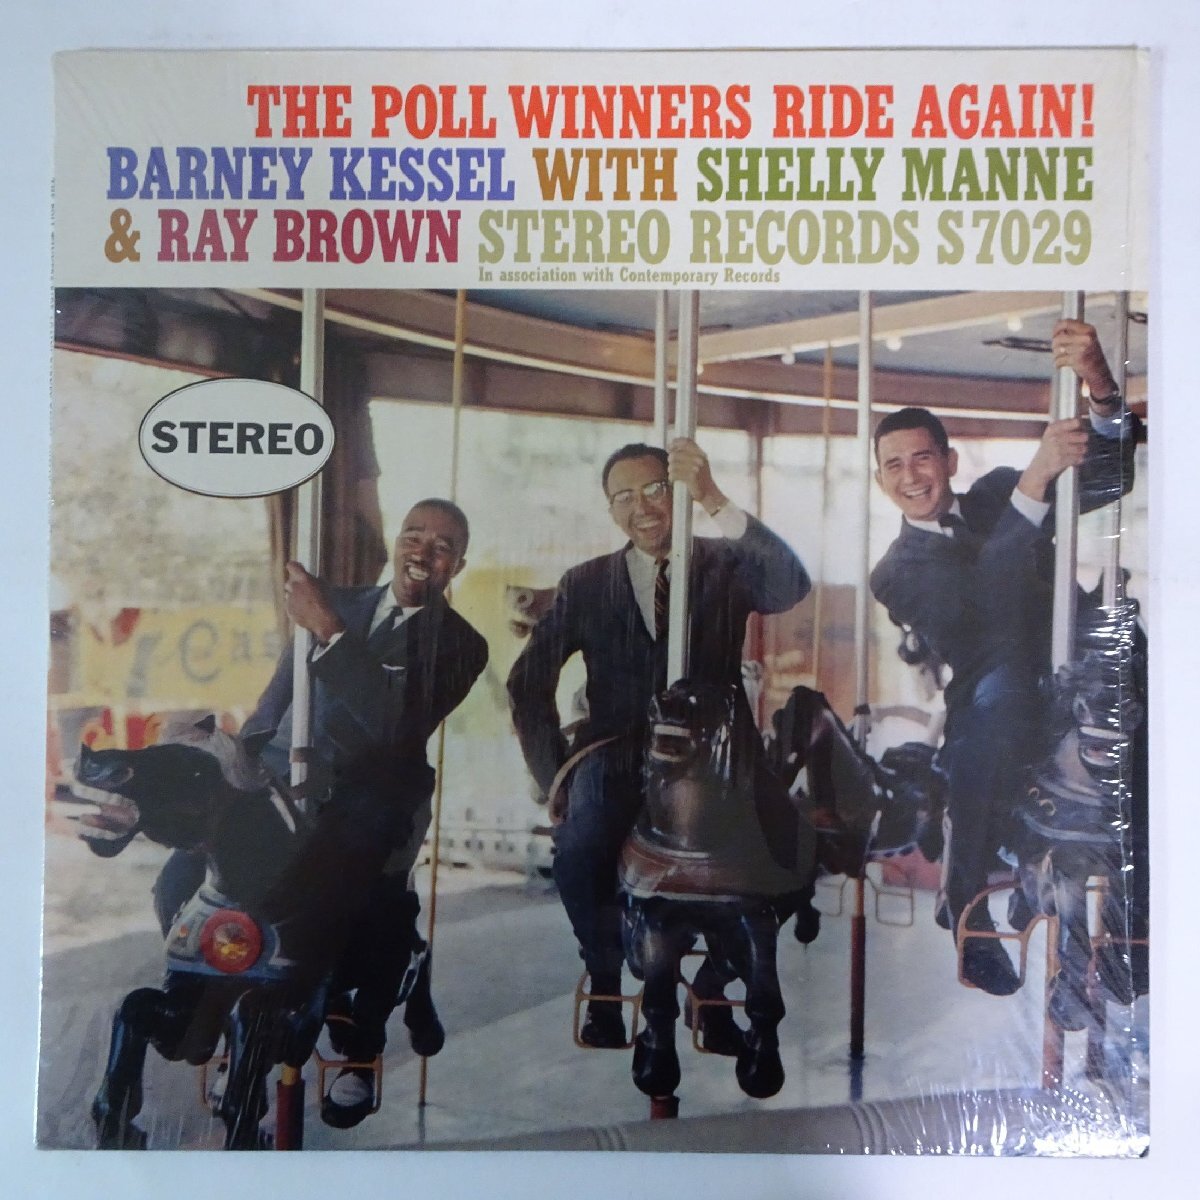 10026735;【US盤/艶黒ラベル/深溝/シュリンク/Stereo Records】The Poll Winners / Ride Again!_画像1